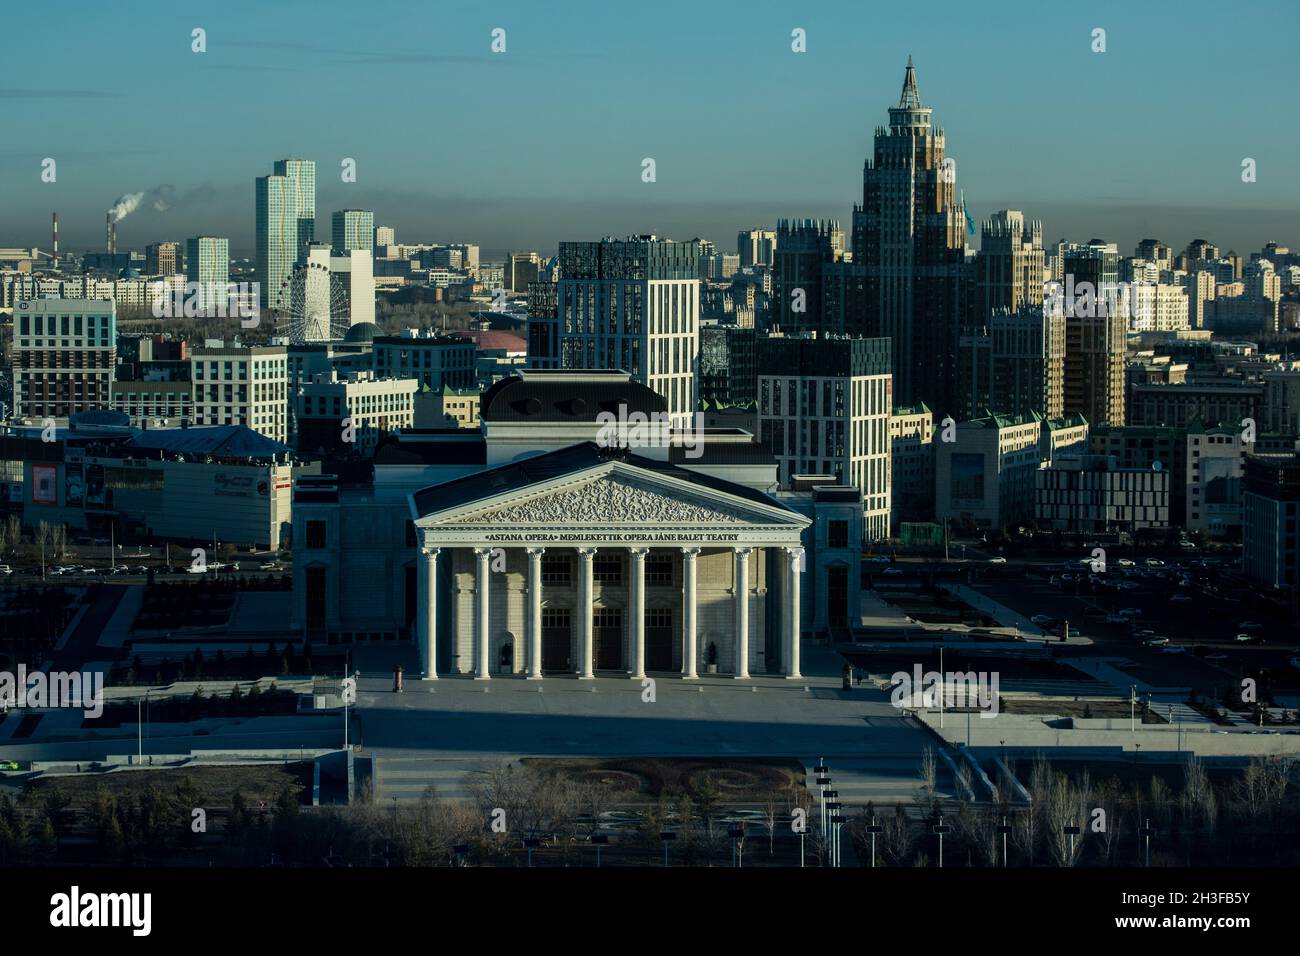 Scenes from Nur-Sultan (formerly Astana), capital city of Kazakhstan in Central Asia. Stock Photo